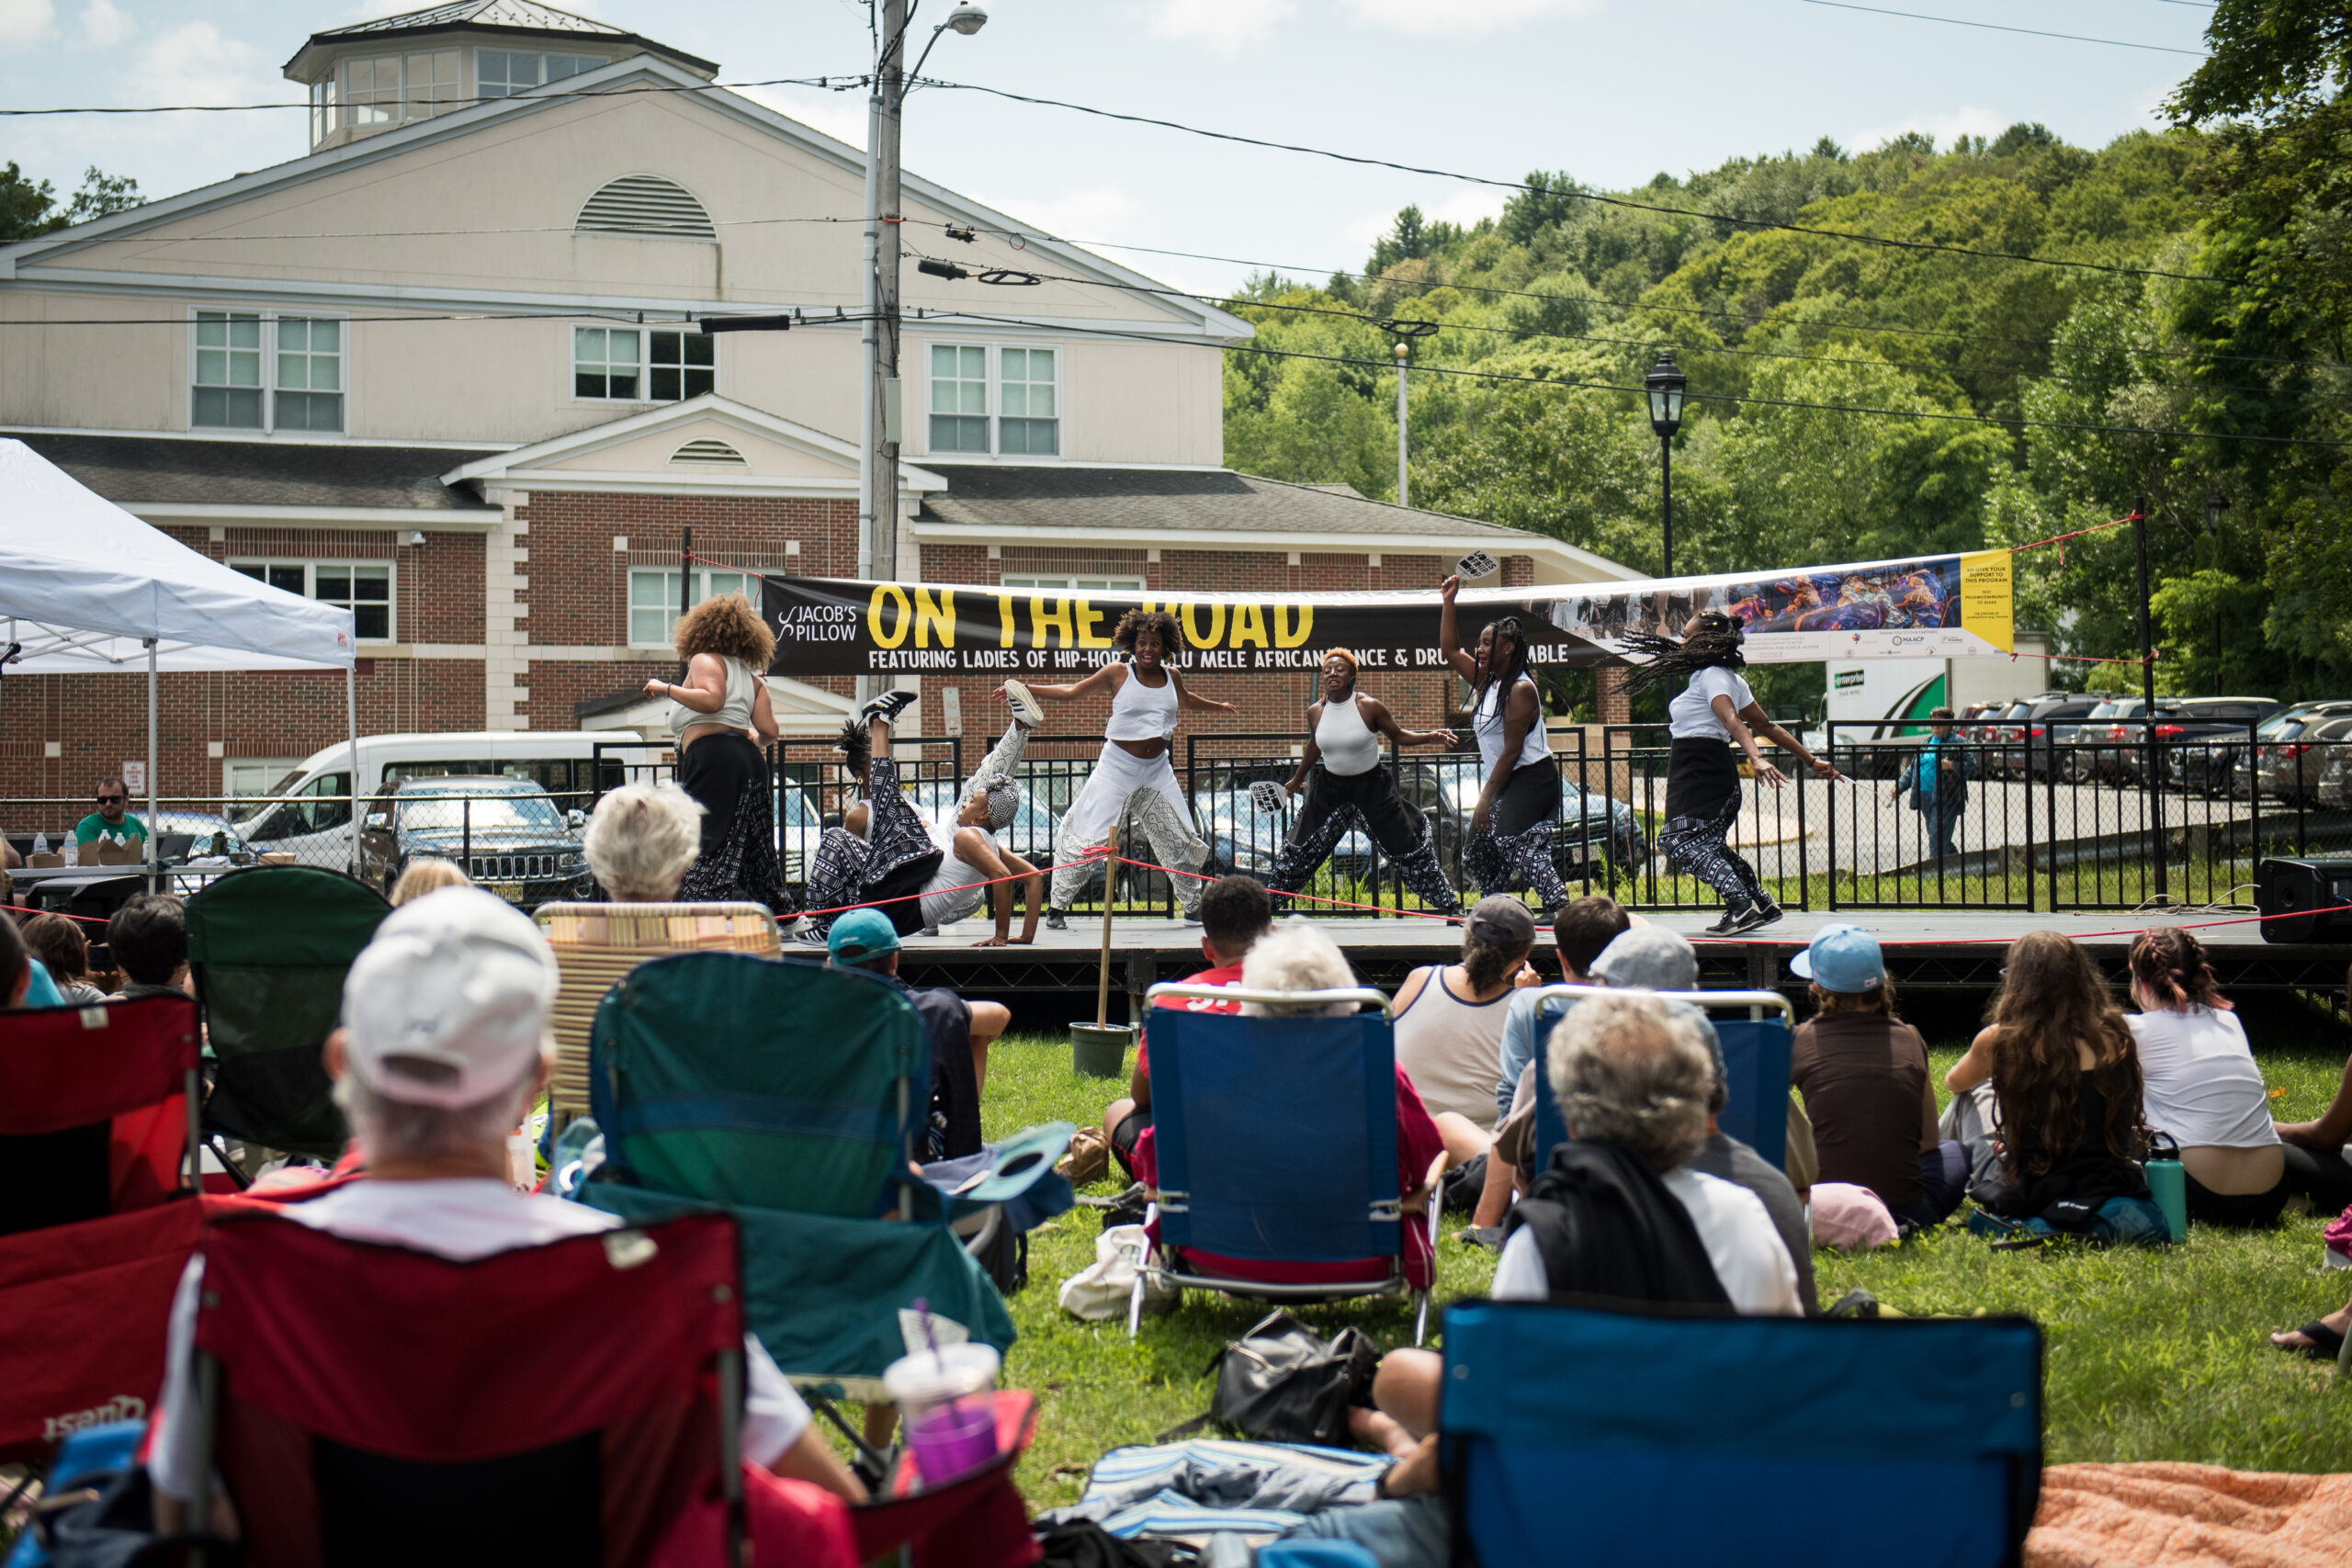 People sitting in lawn chairs face an outdoor stage where a hip-hop group of all women perform.